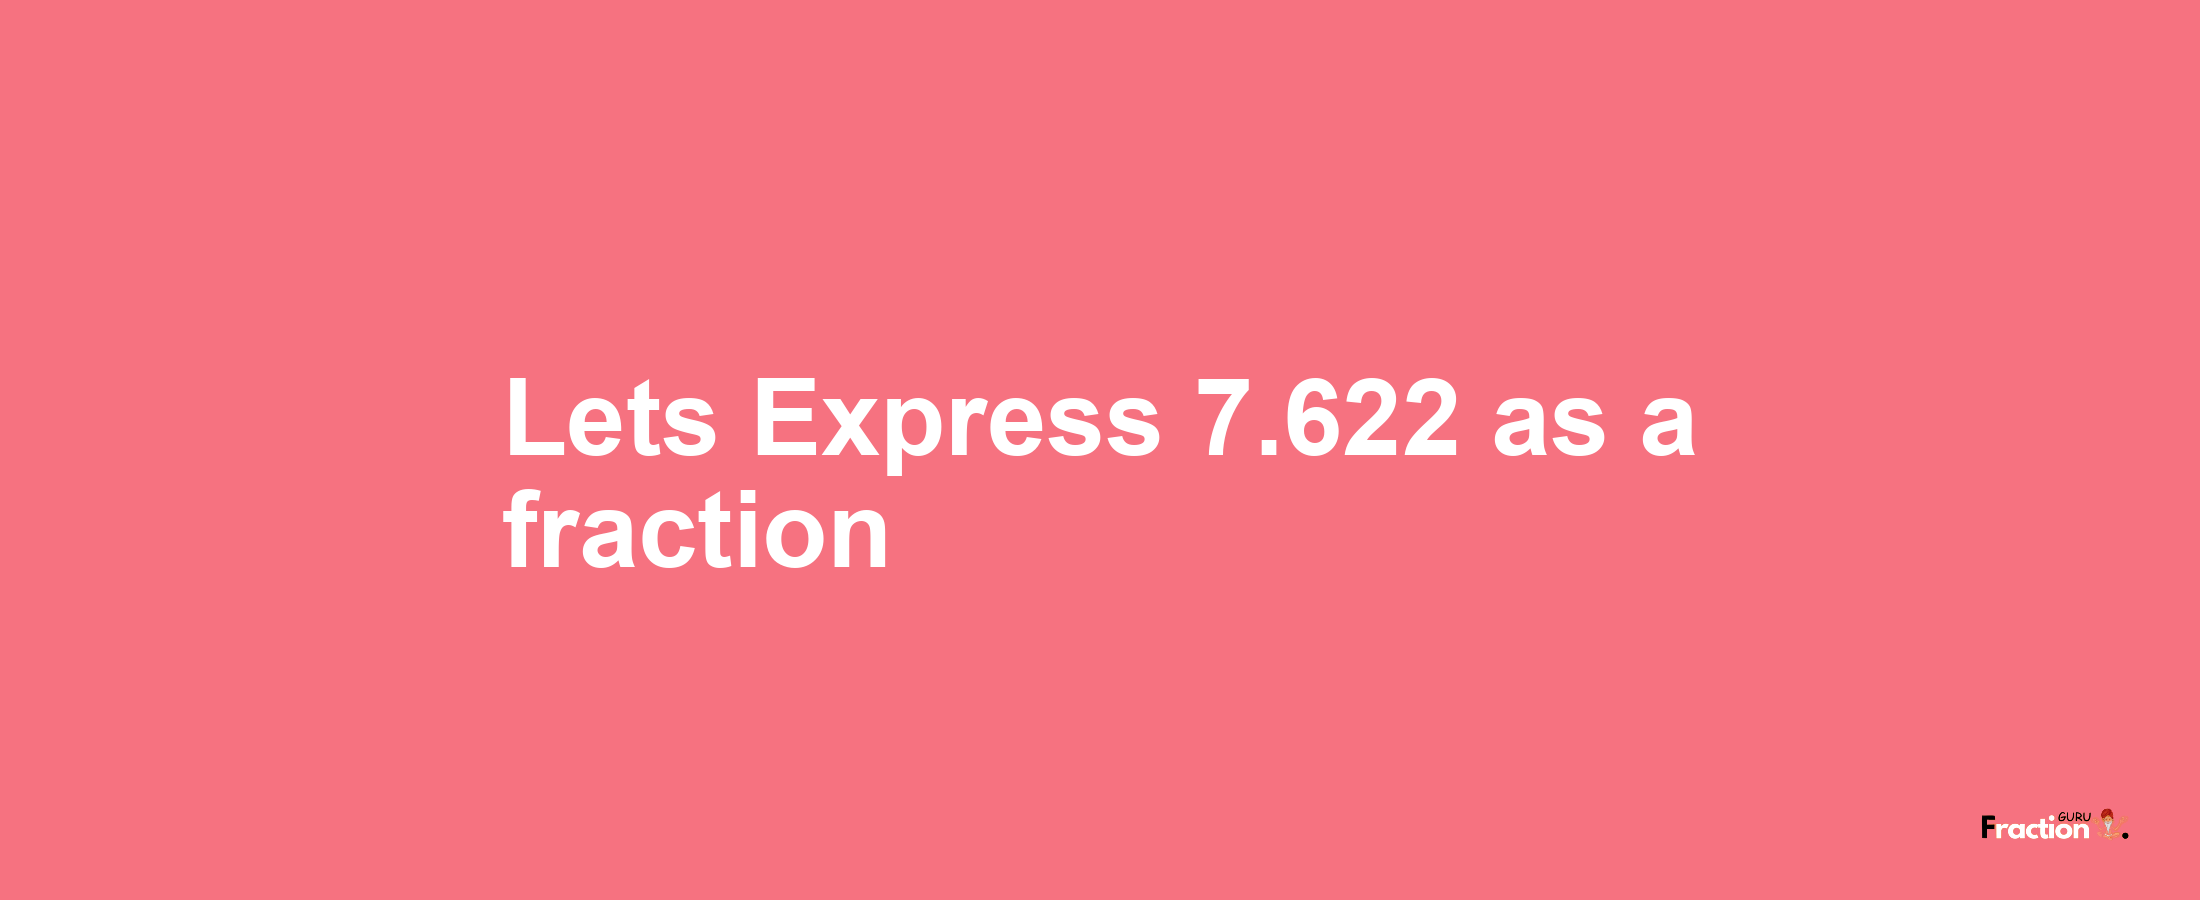 Lets Express 7.622 as afraction